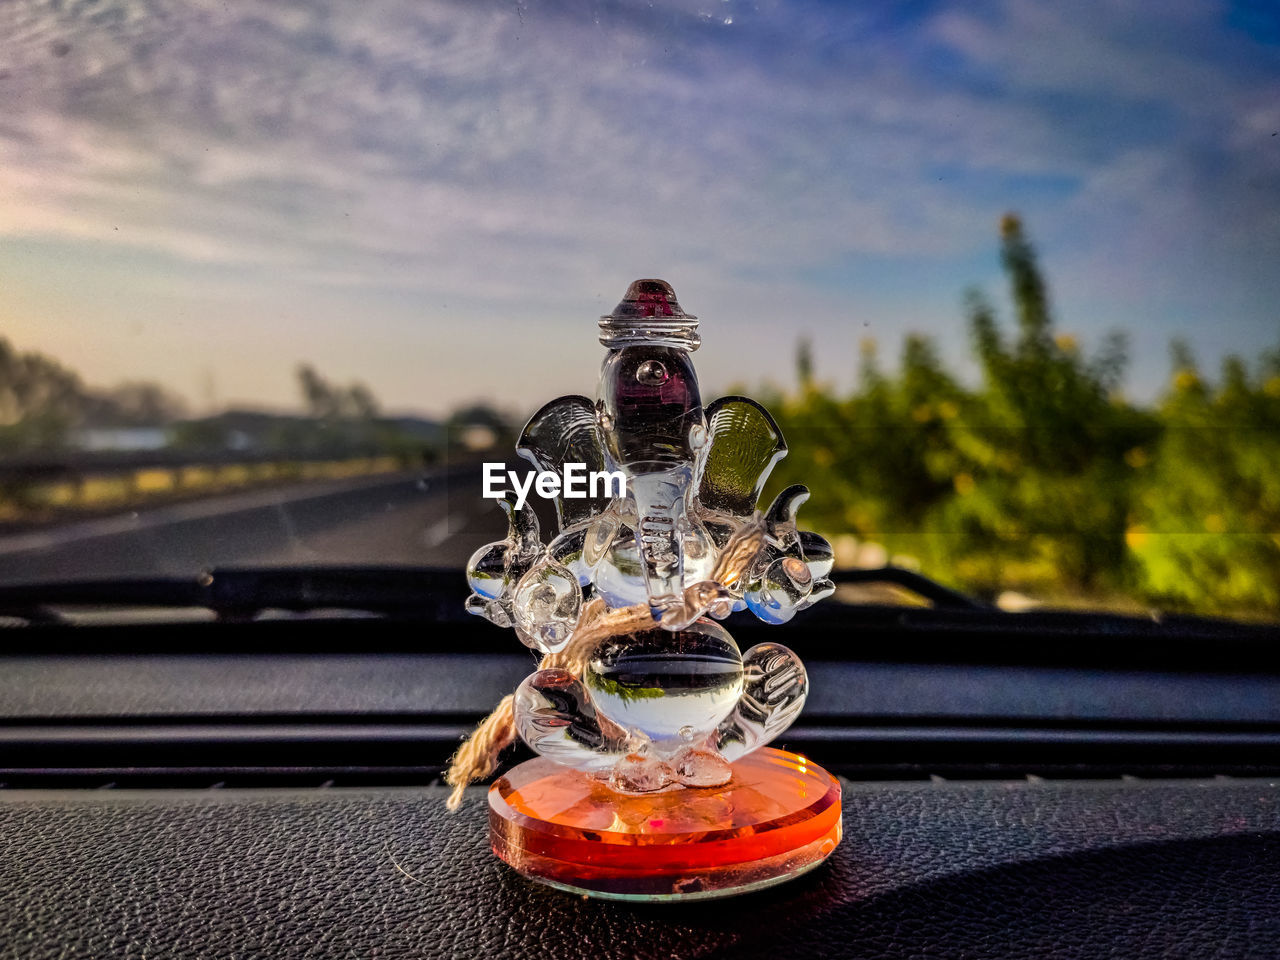 Close-up of ganesh statue on dashboard